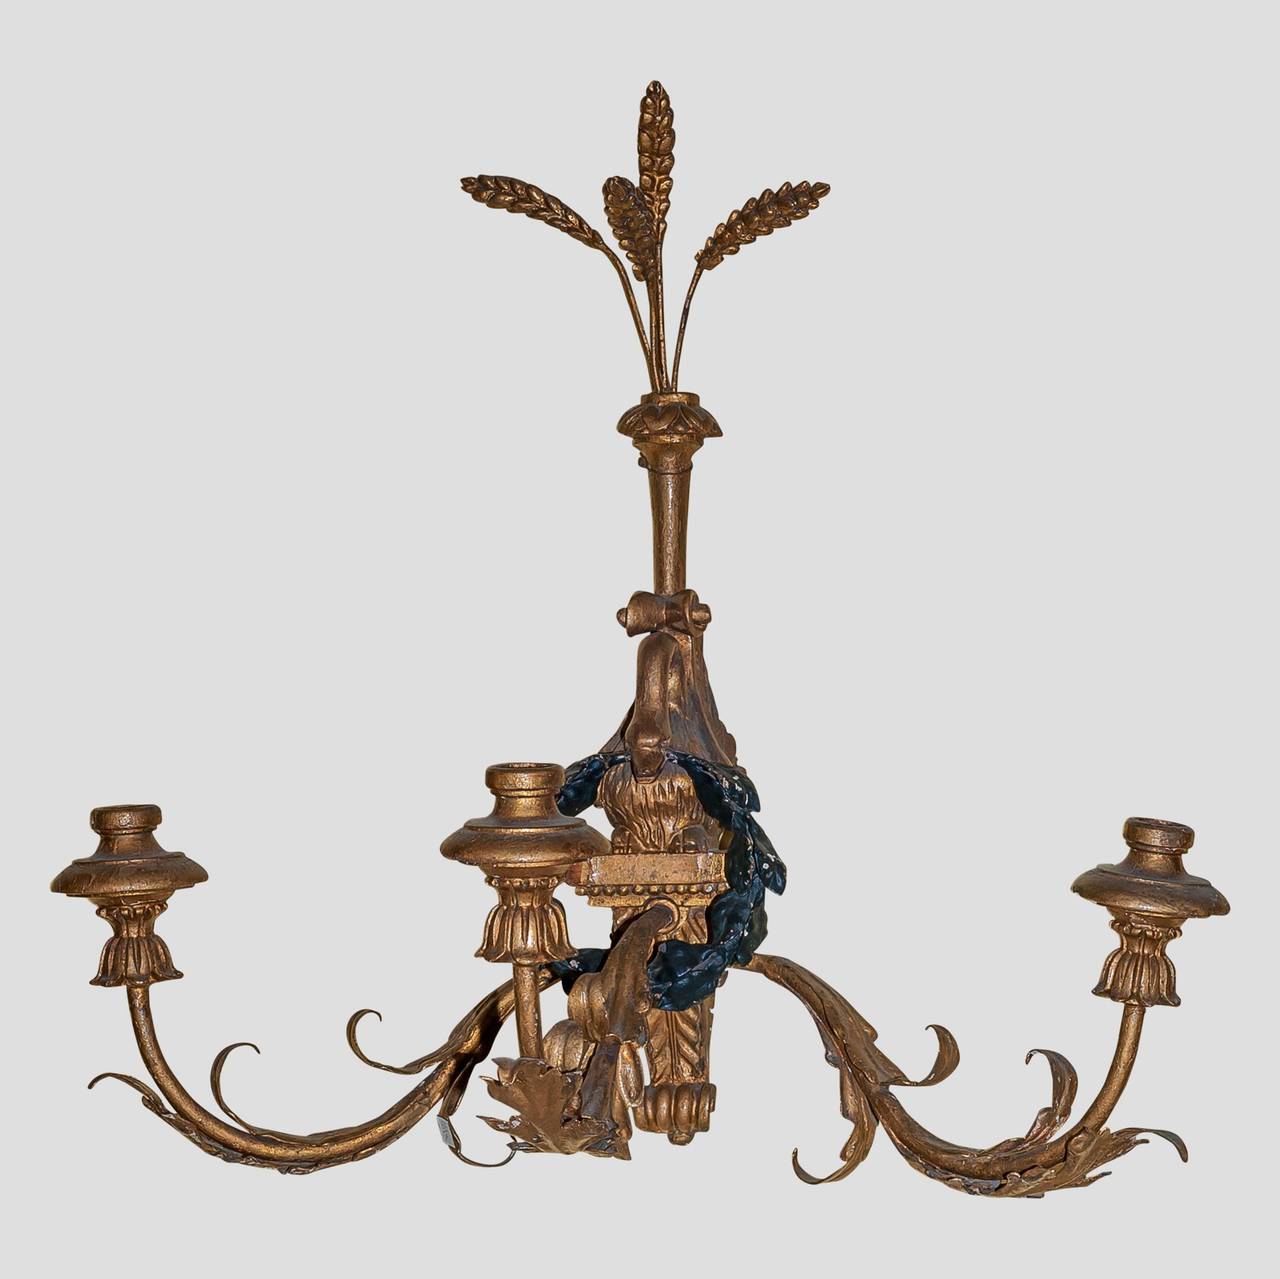 Pair of giltwood and tole three-arm wall light sconces
Stock number: L292.